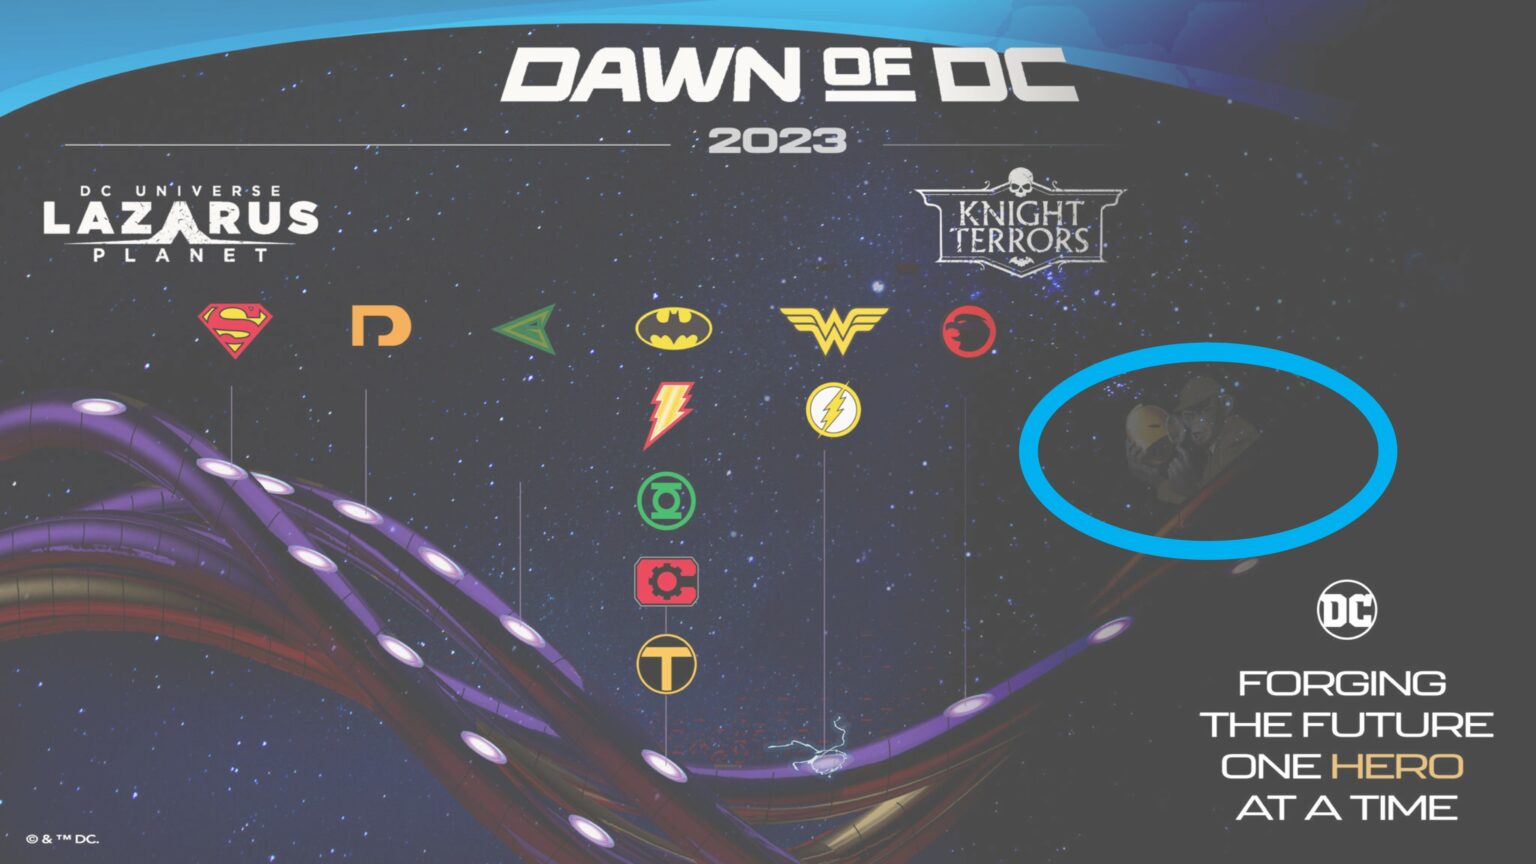 DC Comics Teases More For Dawn Of DC With Updated Dawn Of DC 2023